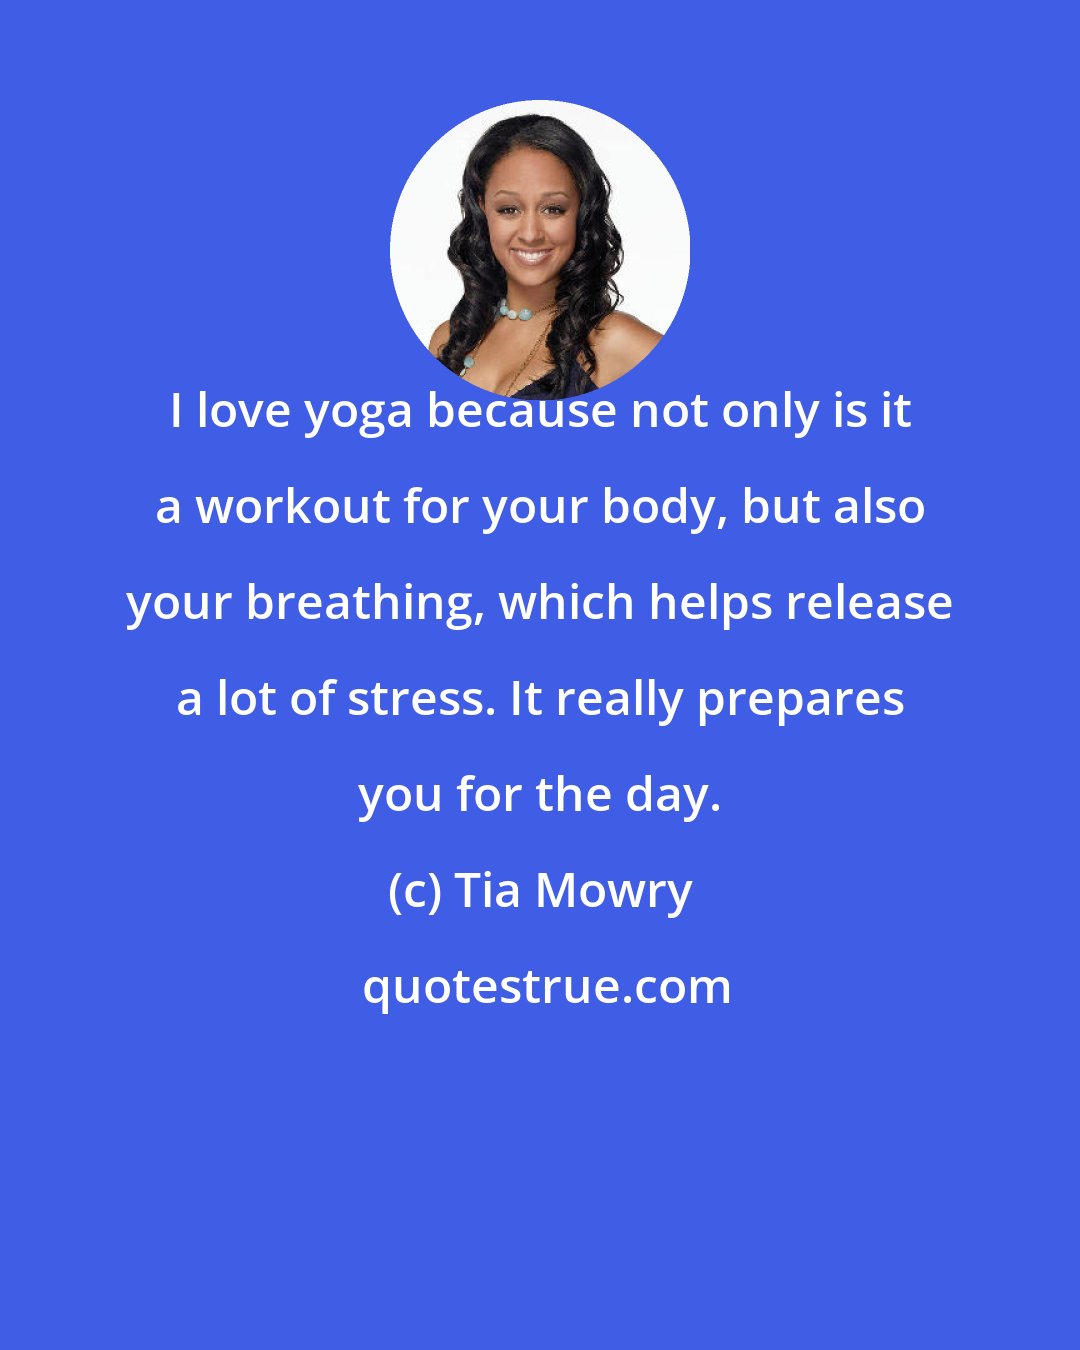 Tia Mowry: I love yoga because not only is it a workout for your body, but also your breathing, which helps release a lot of stress. It really prepares you for the day.